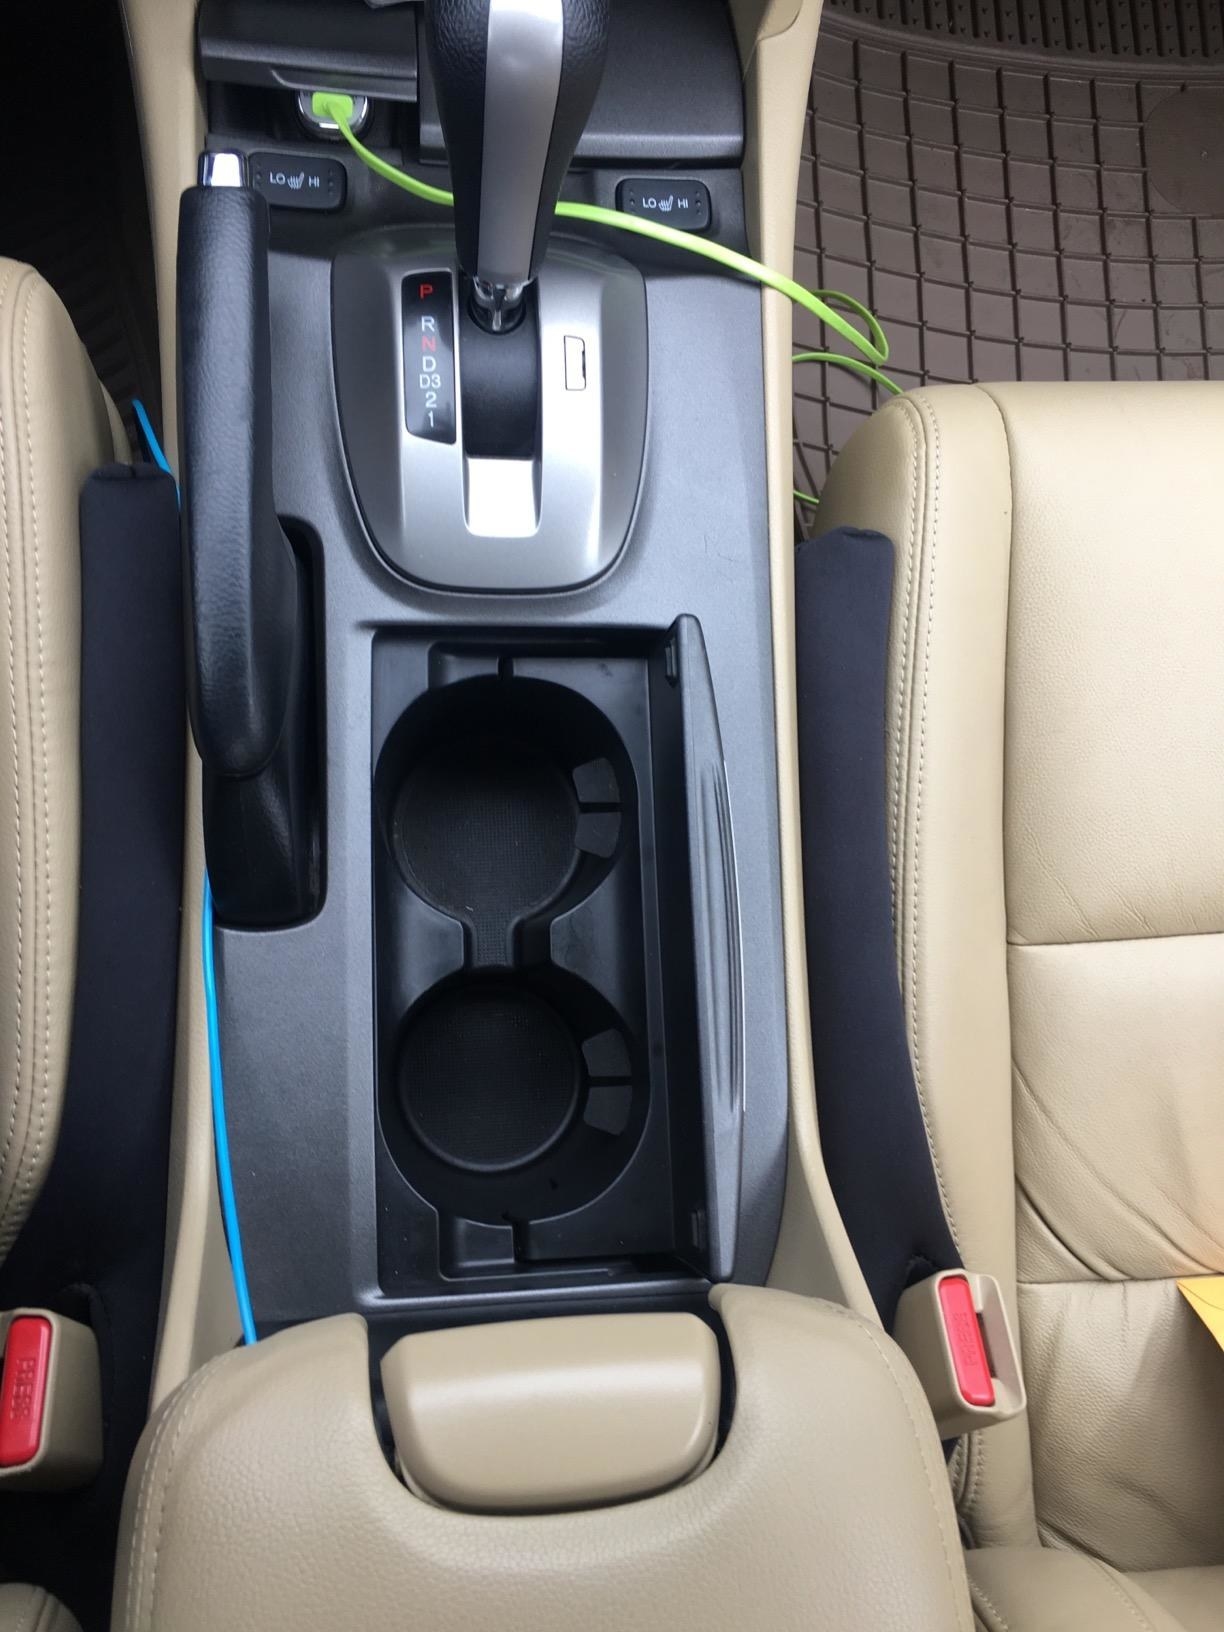 Car seat filler in use in vehicle